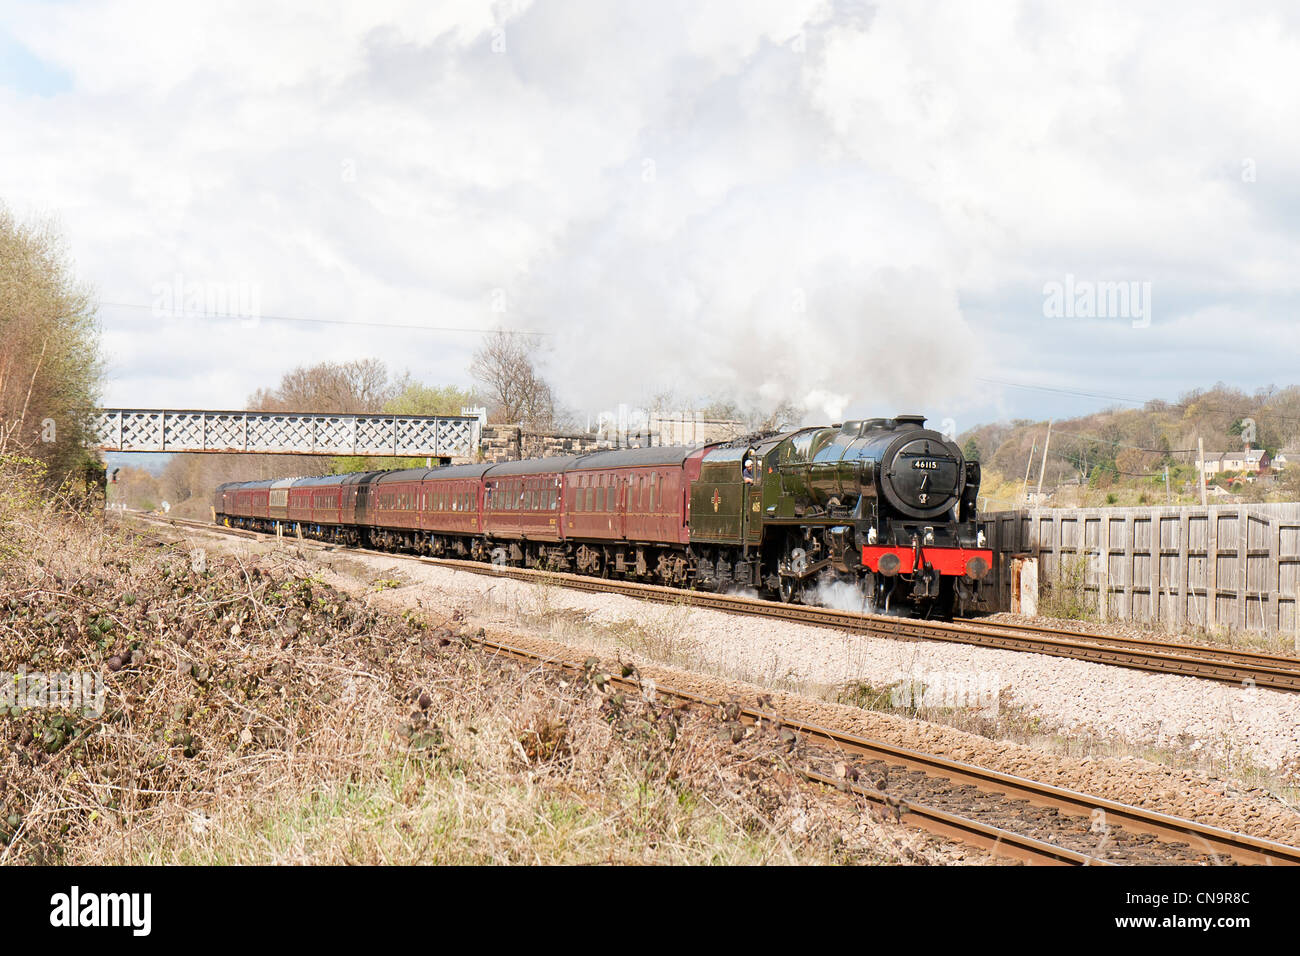 A steam locomotive pulling a passenger train on the mainline near Mirfield, West Yorkshire Stock Photo